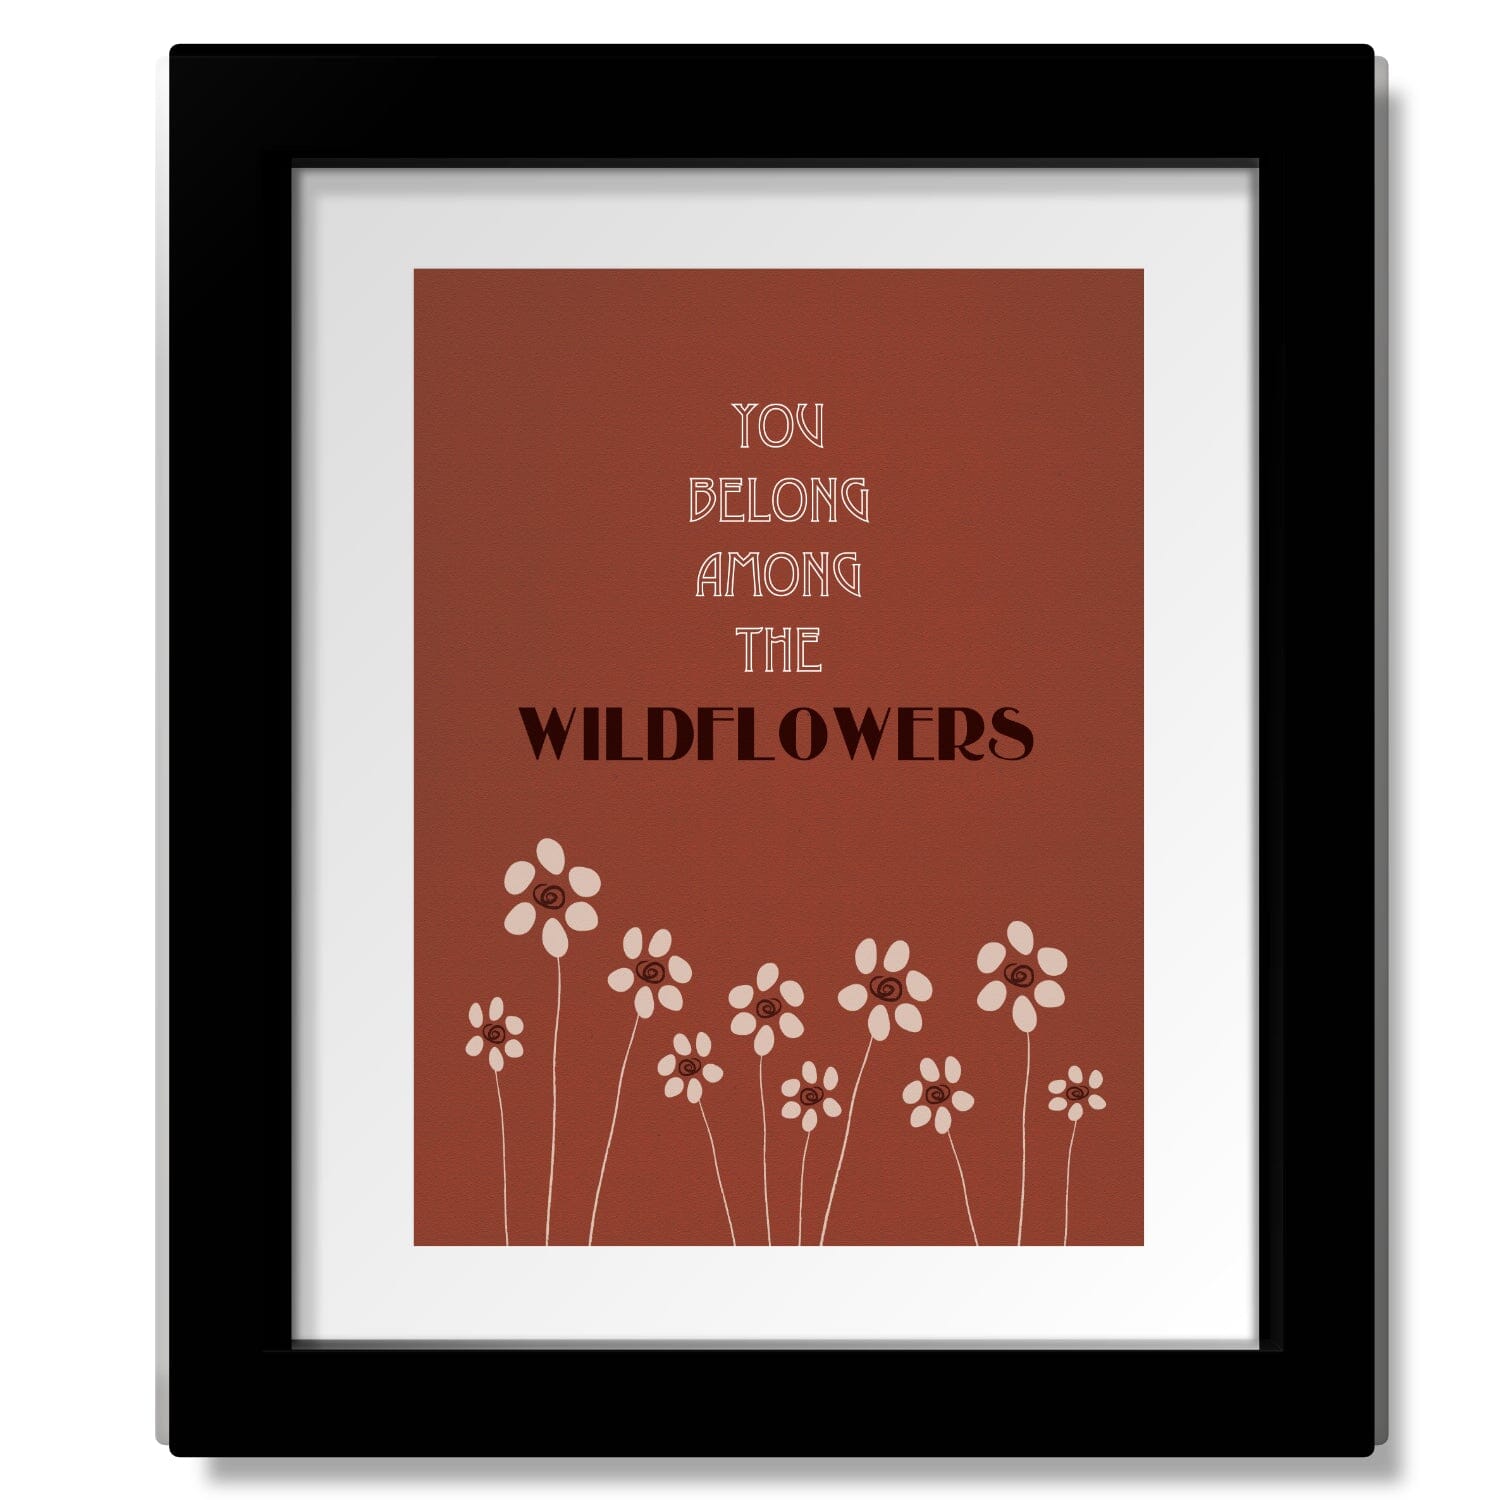 Wildflowers by Tom Petty - Music Poster Song Lyric Art Print Song Lyrics Art Song Lyrics Art 8x10 Matted and Framed Print 